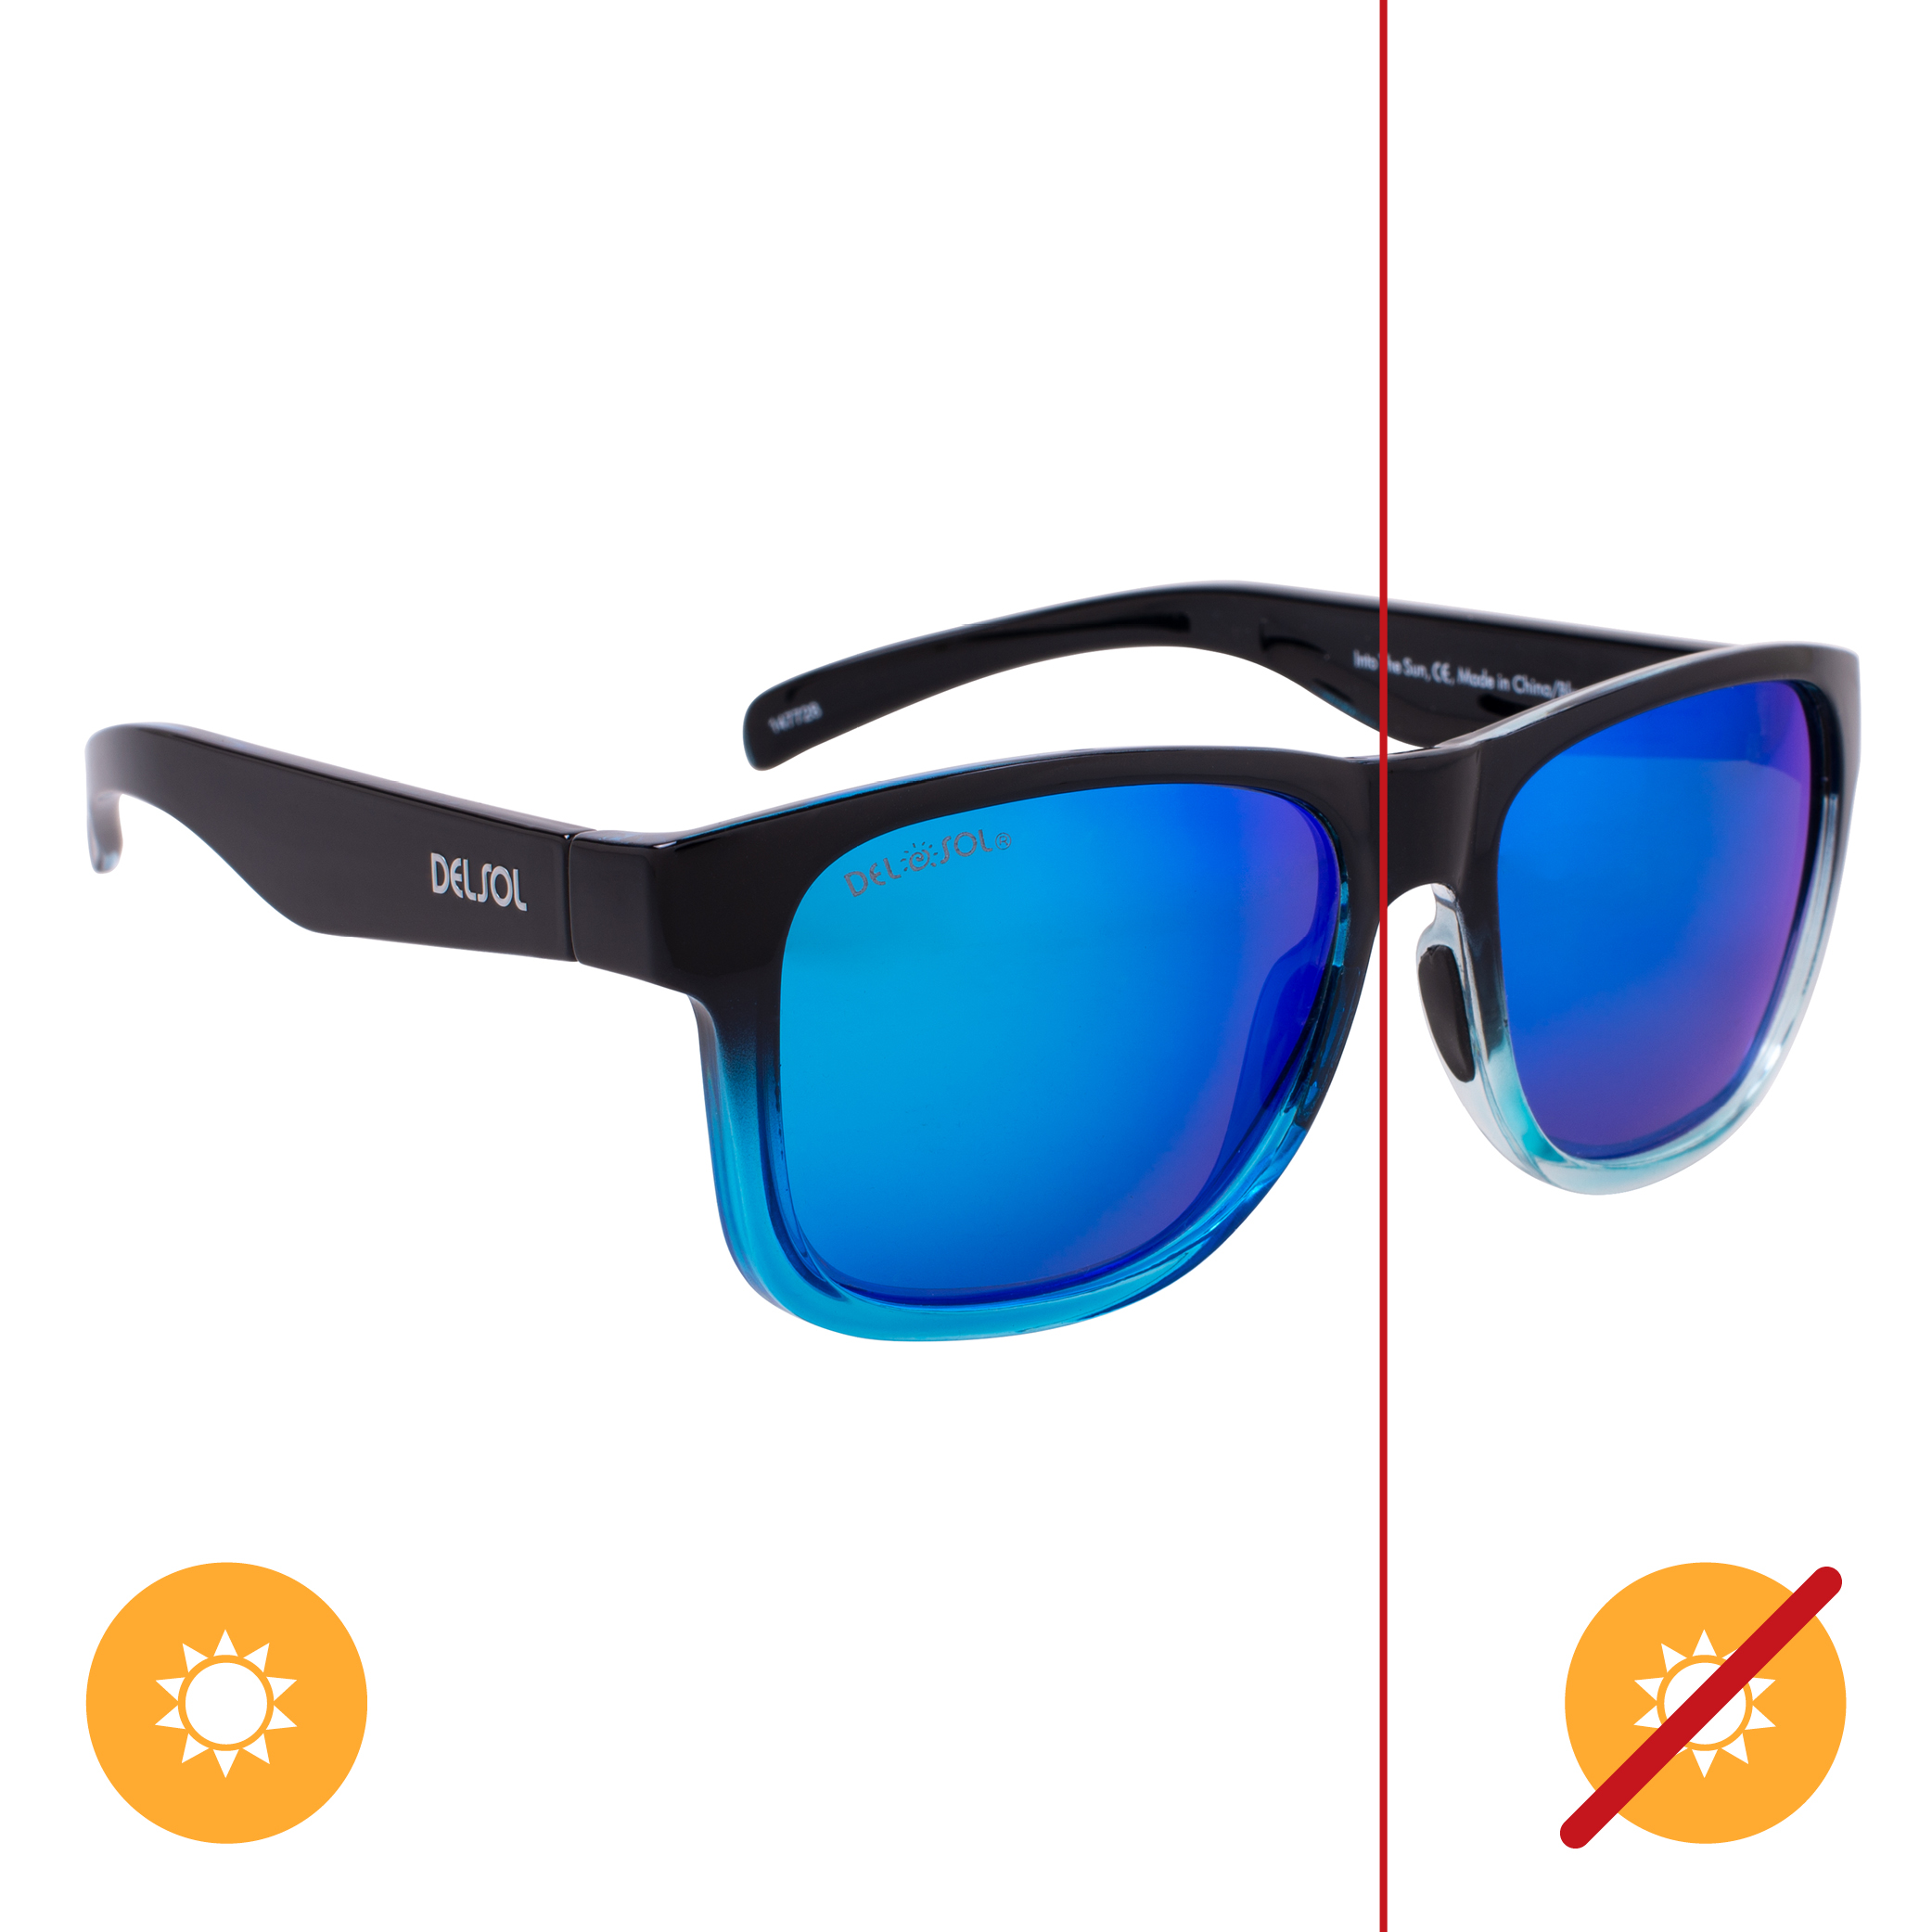 Del Sol Solize Into the Sun - Black and Clear to Blue for Unisex 1 Pc Sunglasses